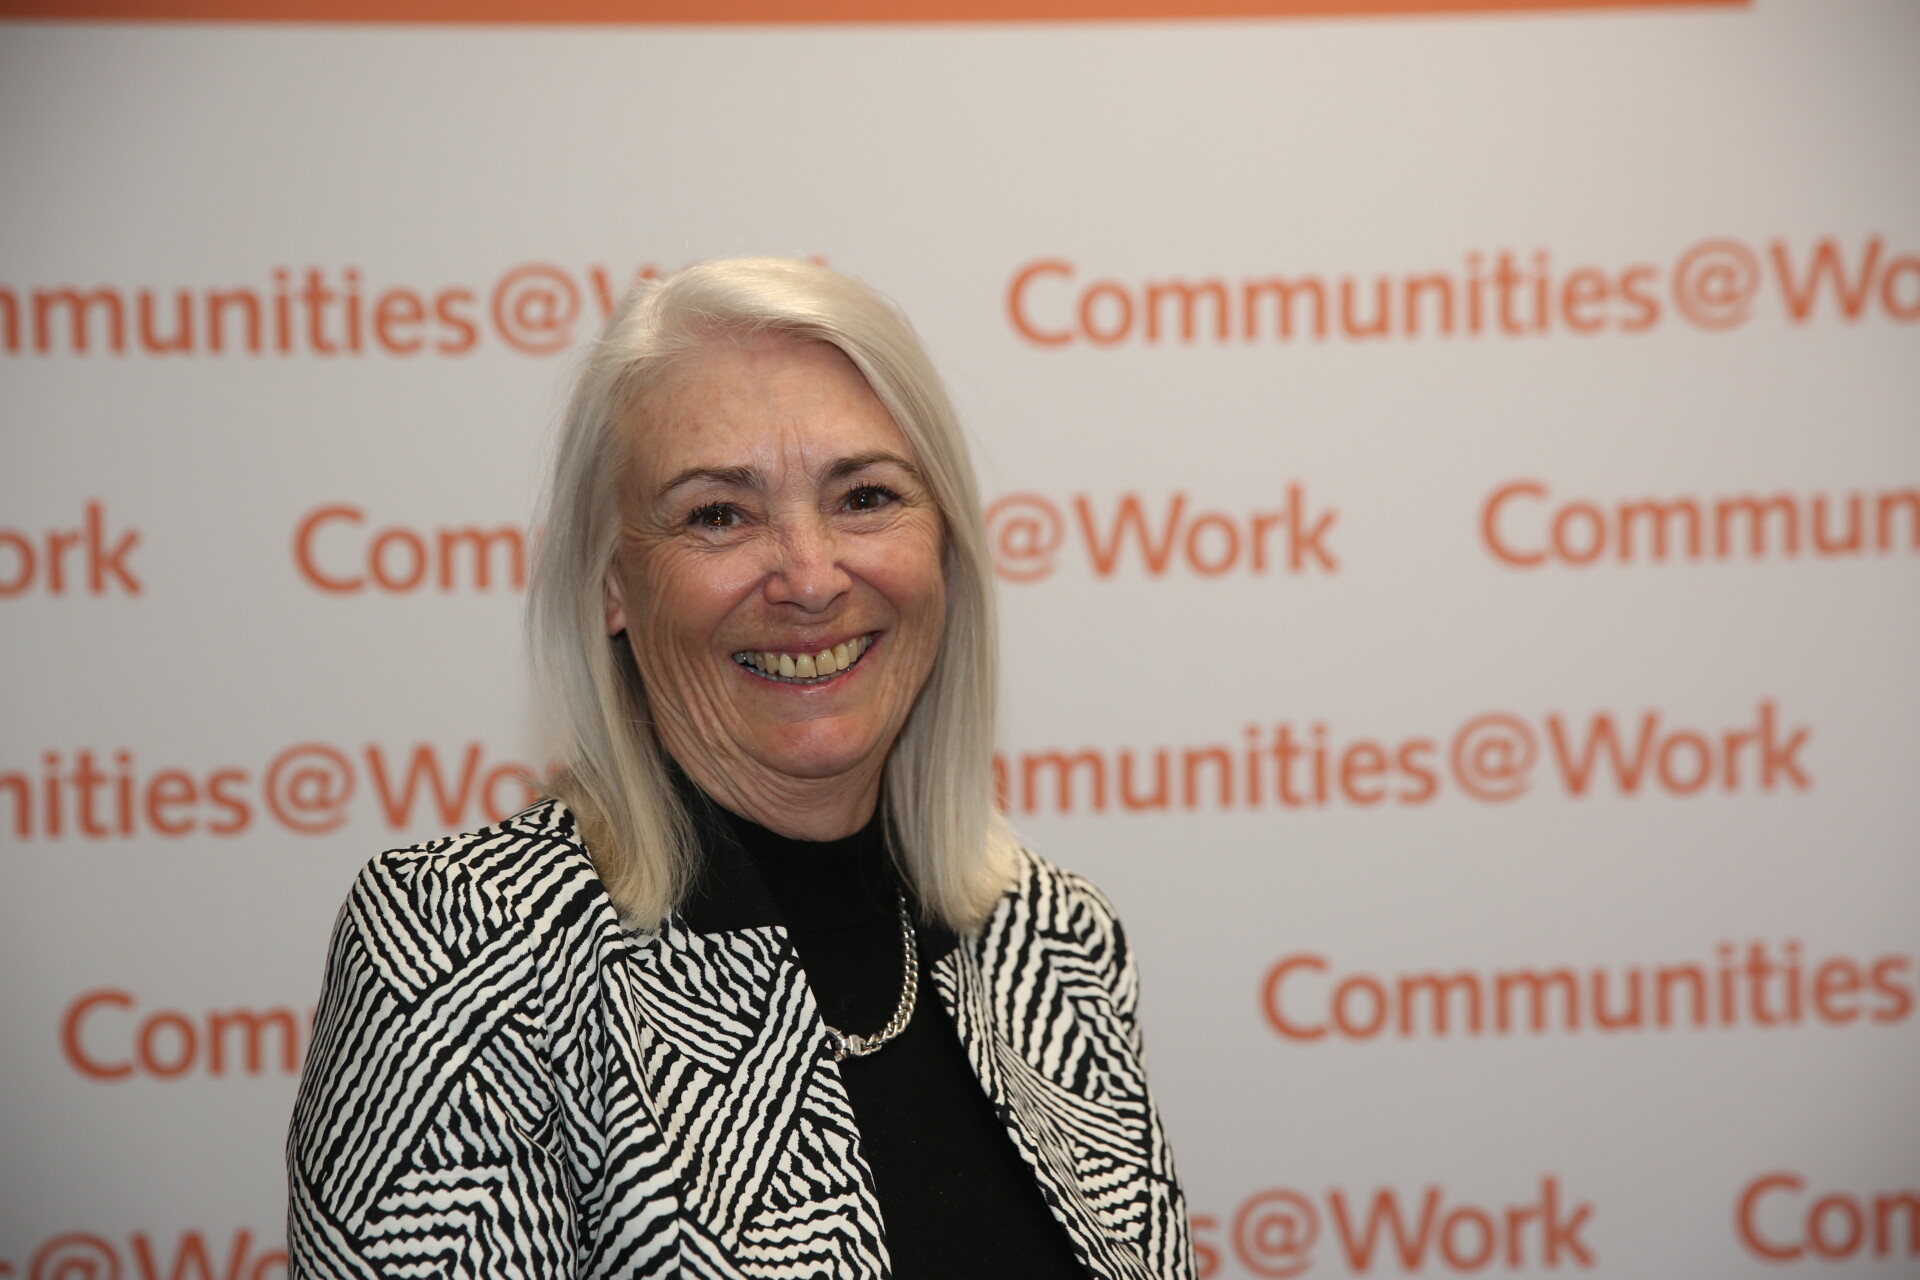 Communities@Work's CEO Lee Maiden discusses a community led recovery